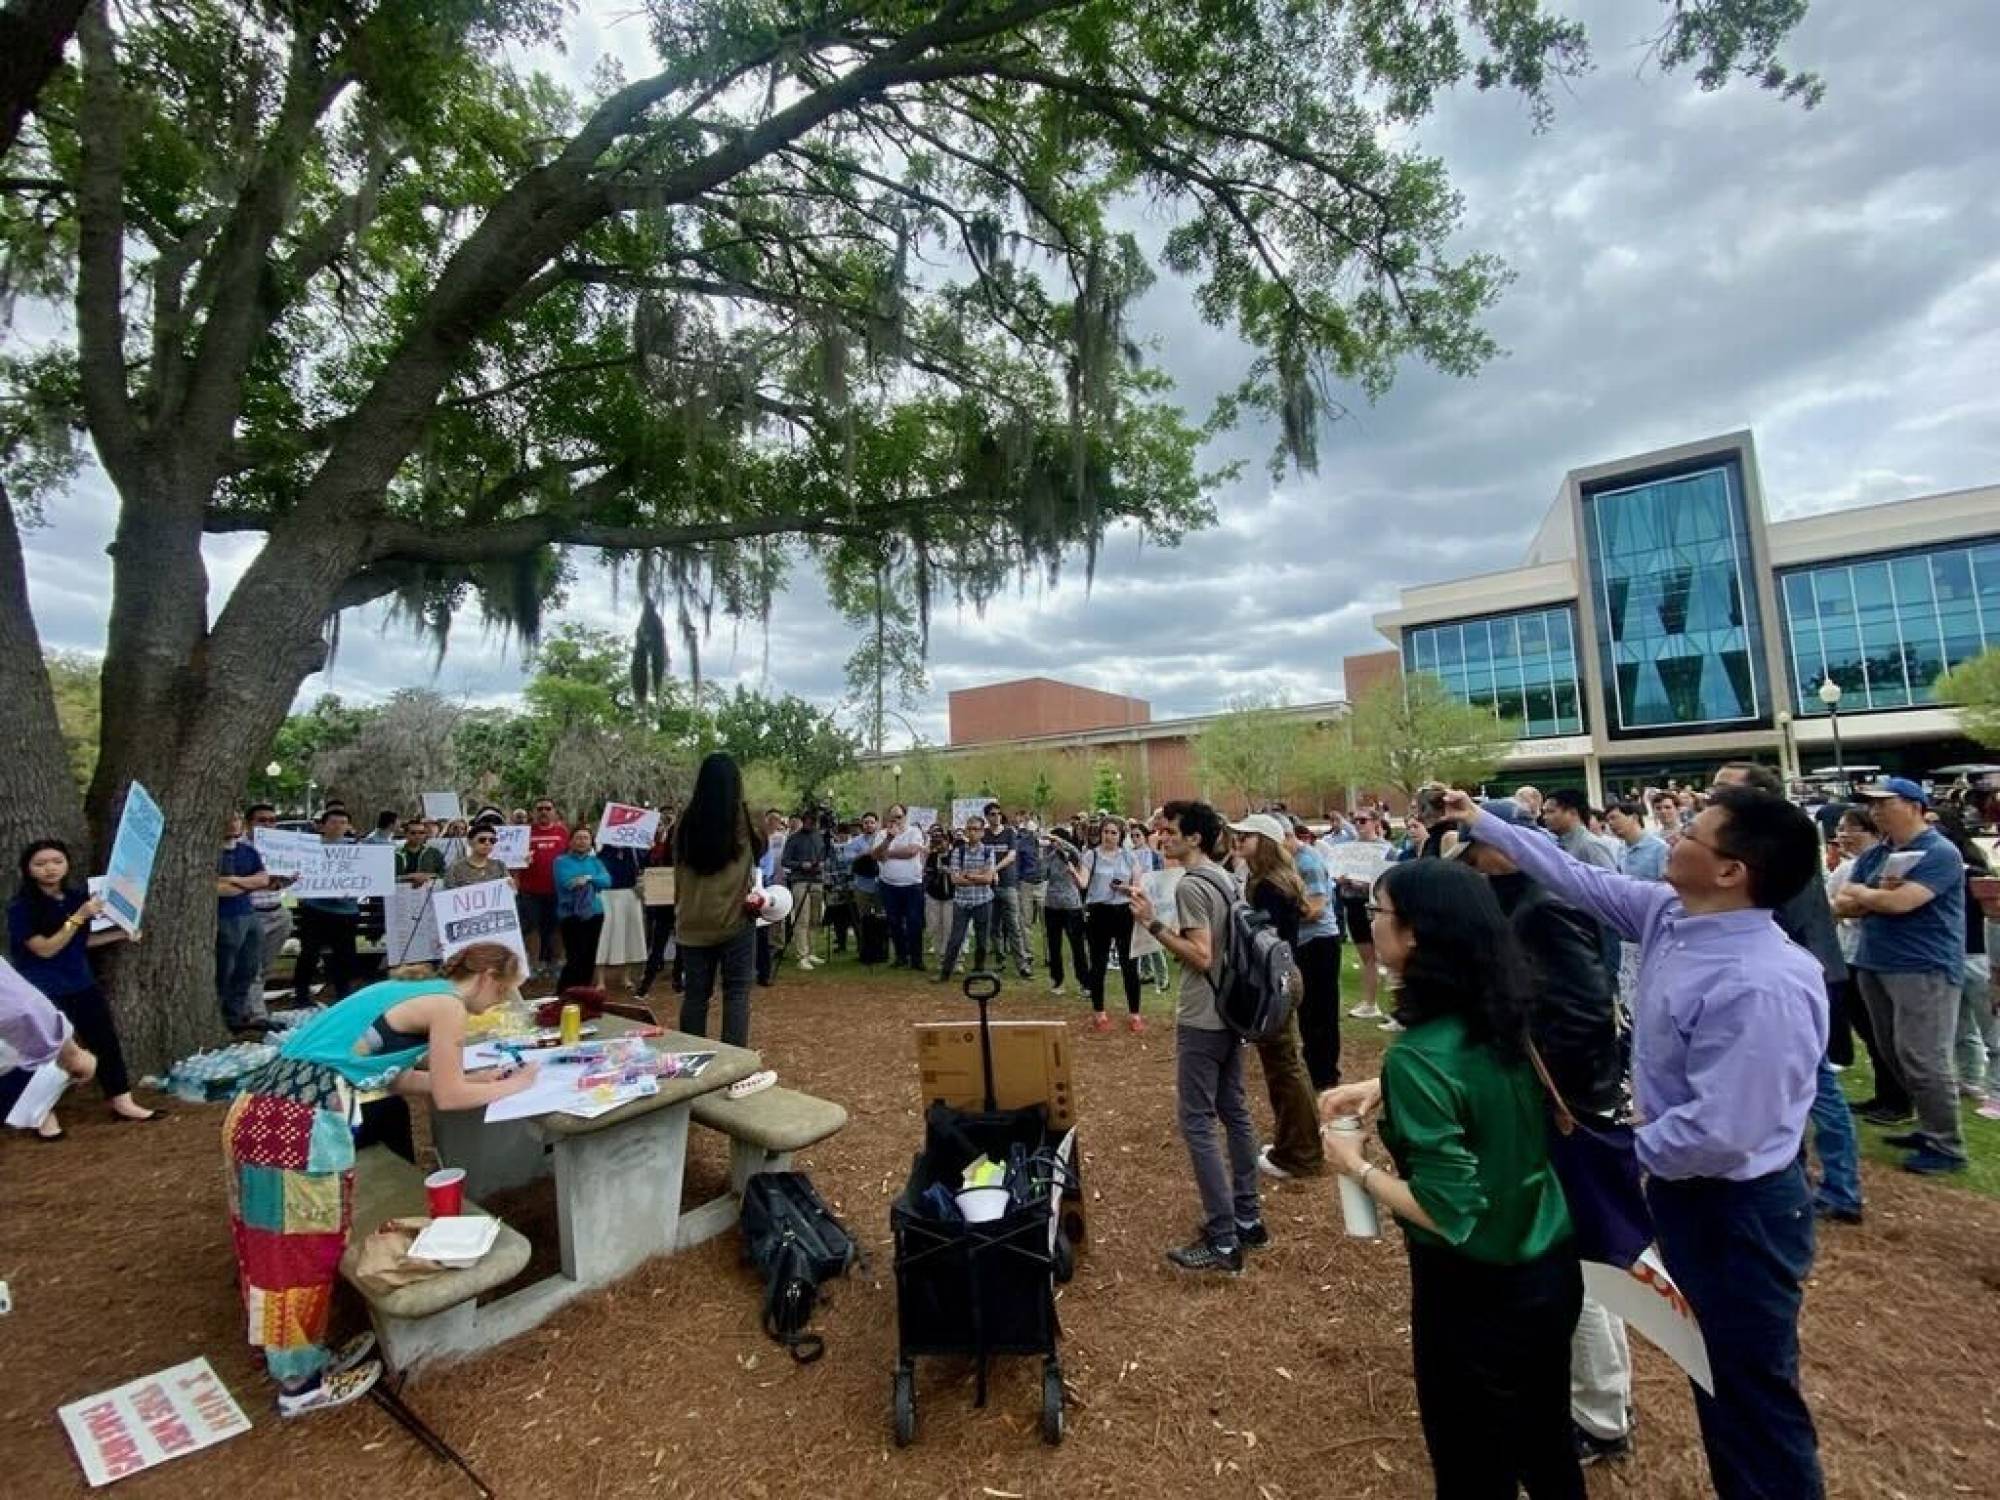 Opponents of a new Florida law that makes it harder for public schools in the state to hire Chinese students and collaborate with Chinese institutions protest on March 26 in Gainesville, where the University of Florida is located. Photo: Asian American Scholar Forum